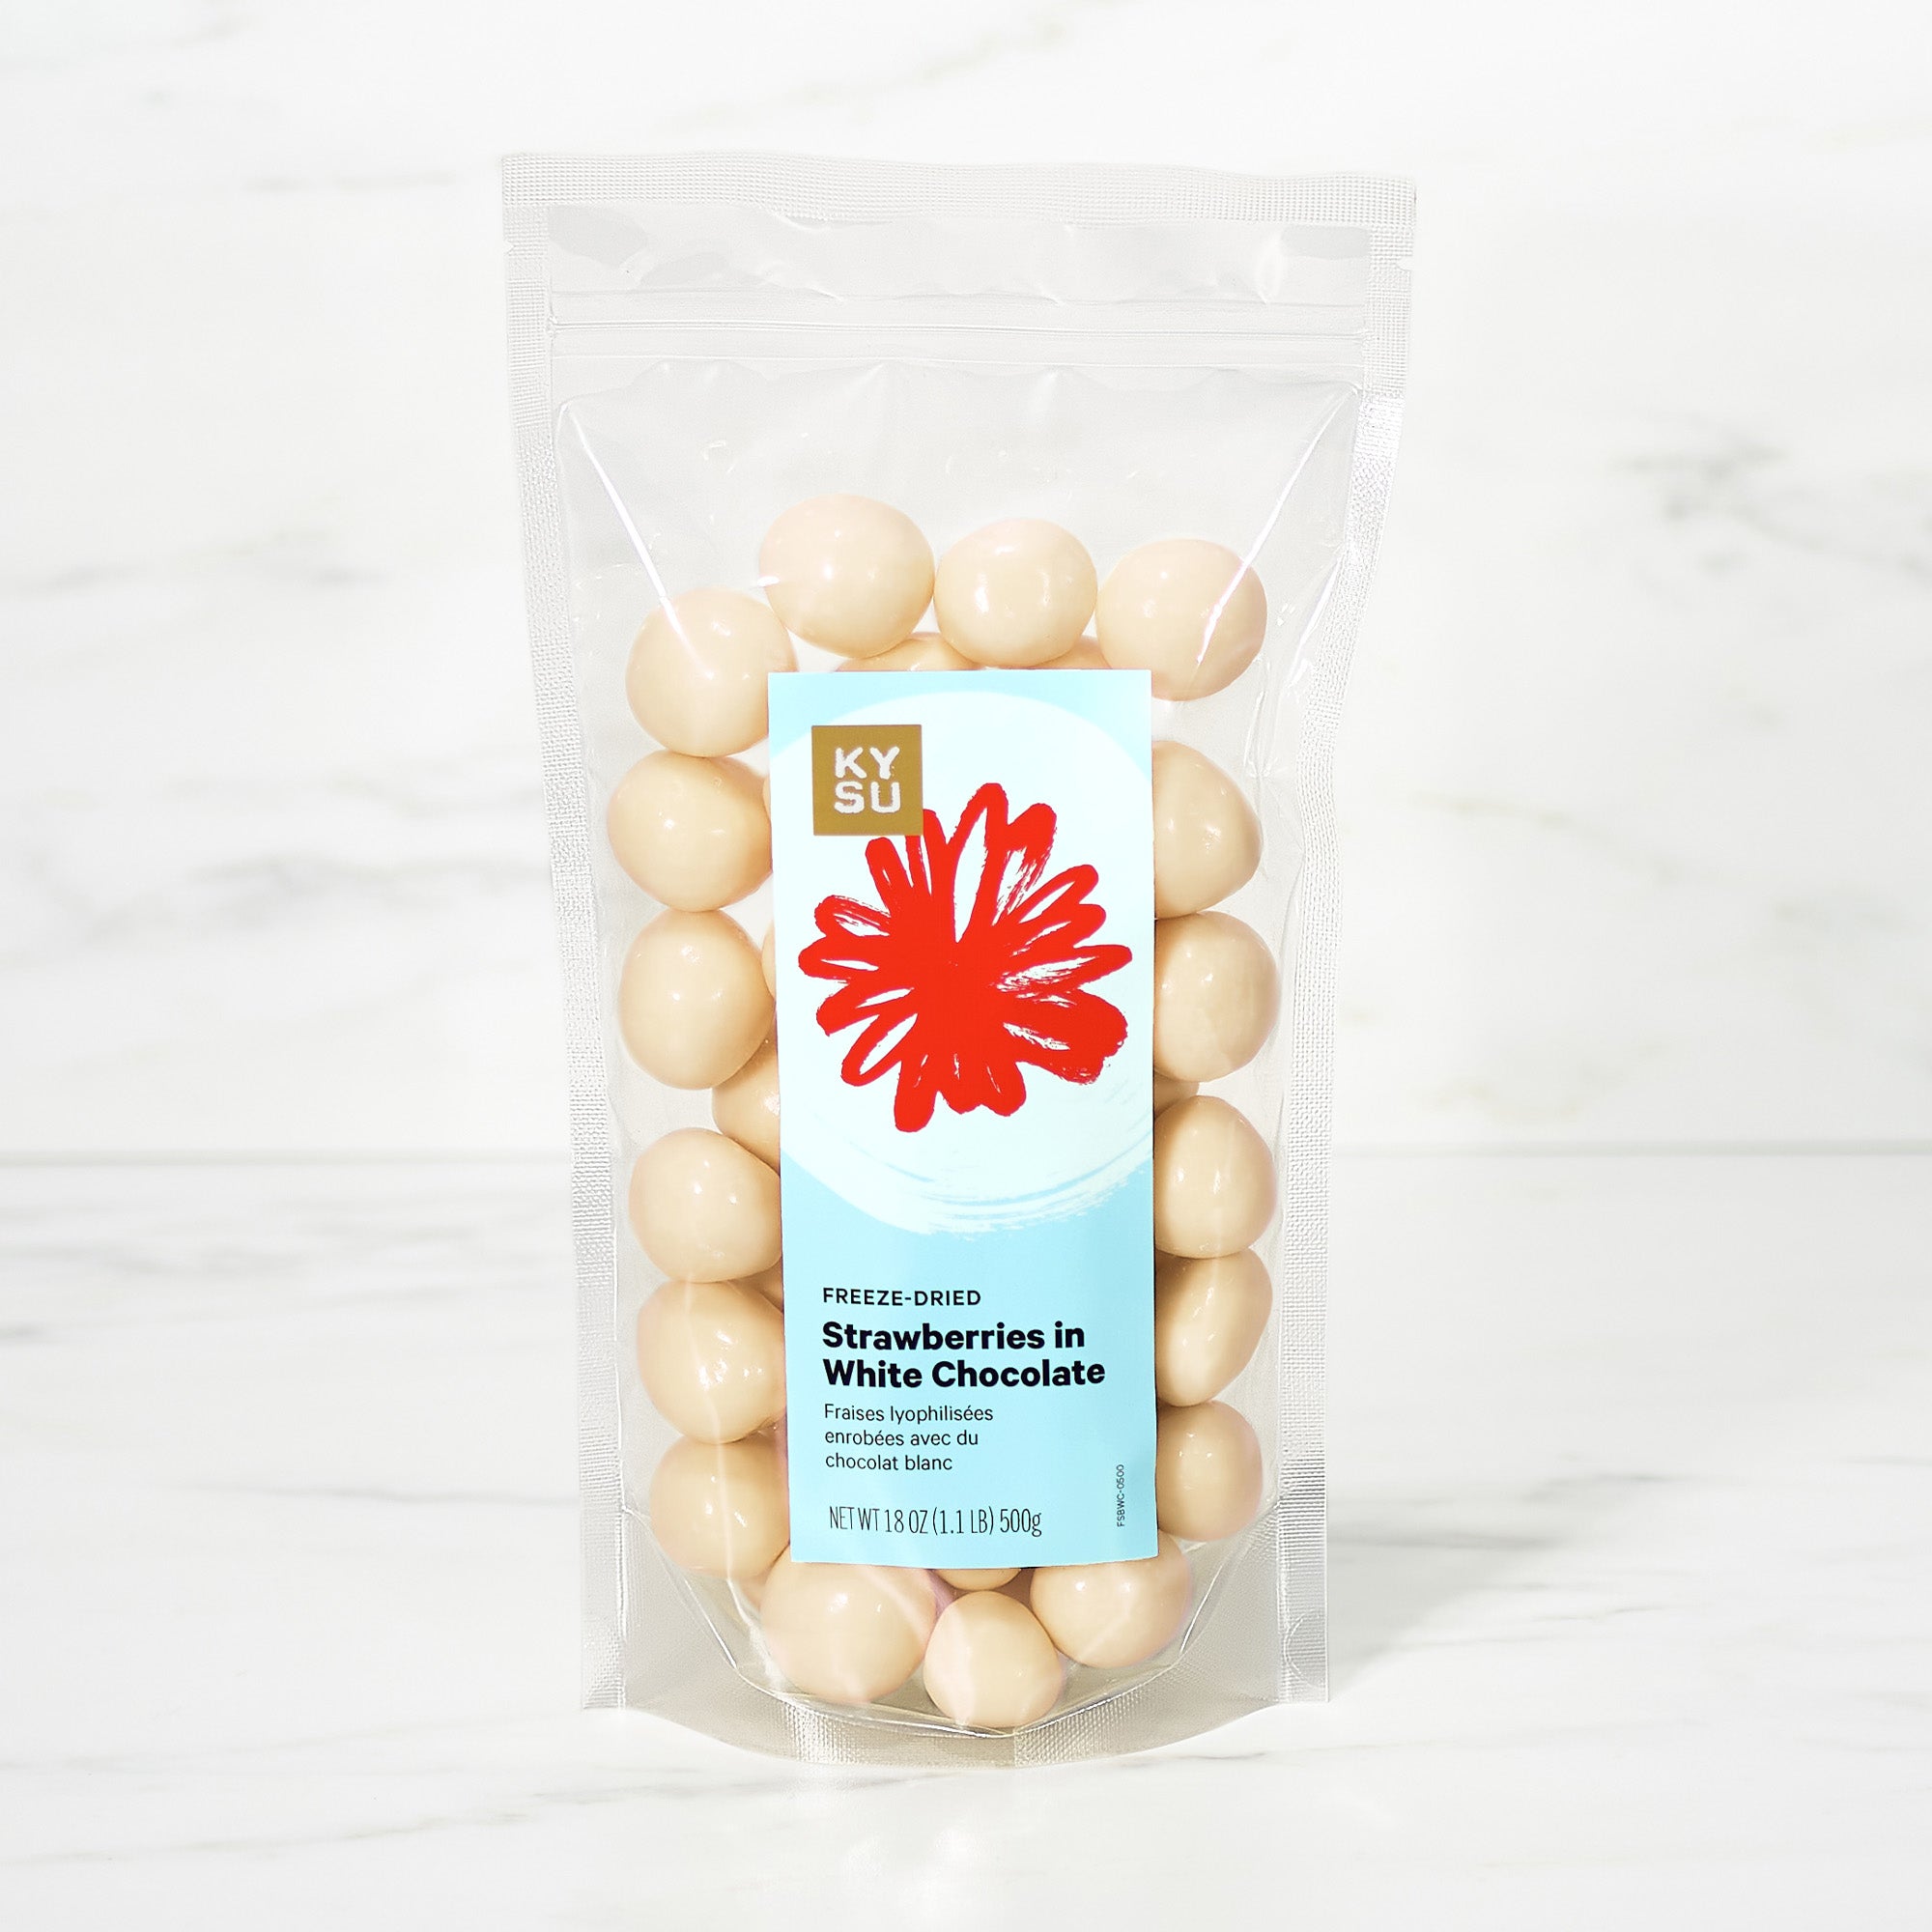 Freeze-dried strawberries in white chocolate, 1.1 lb